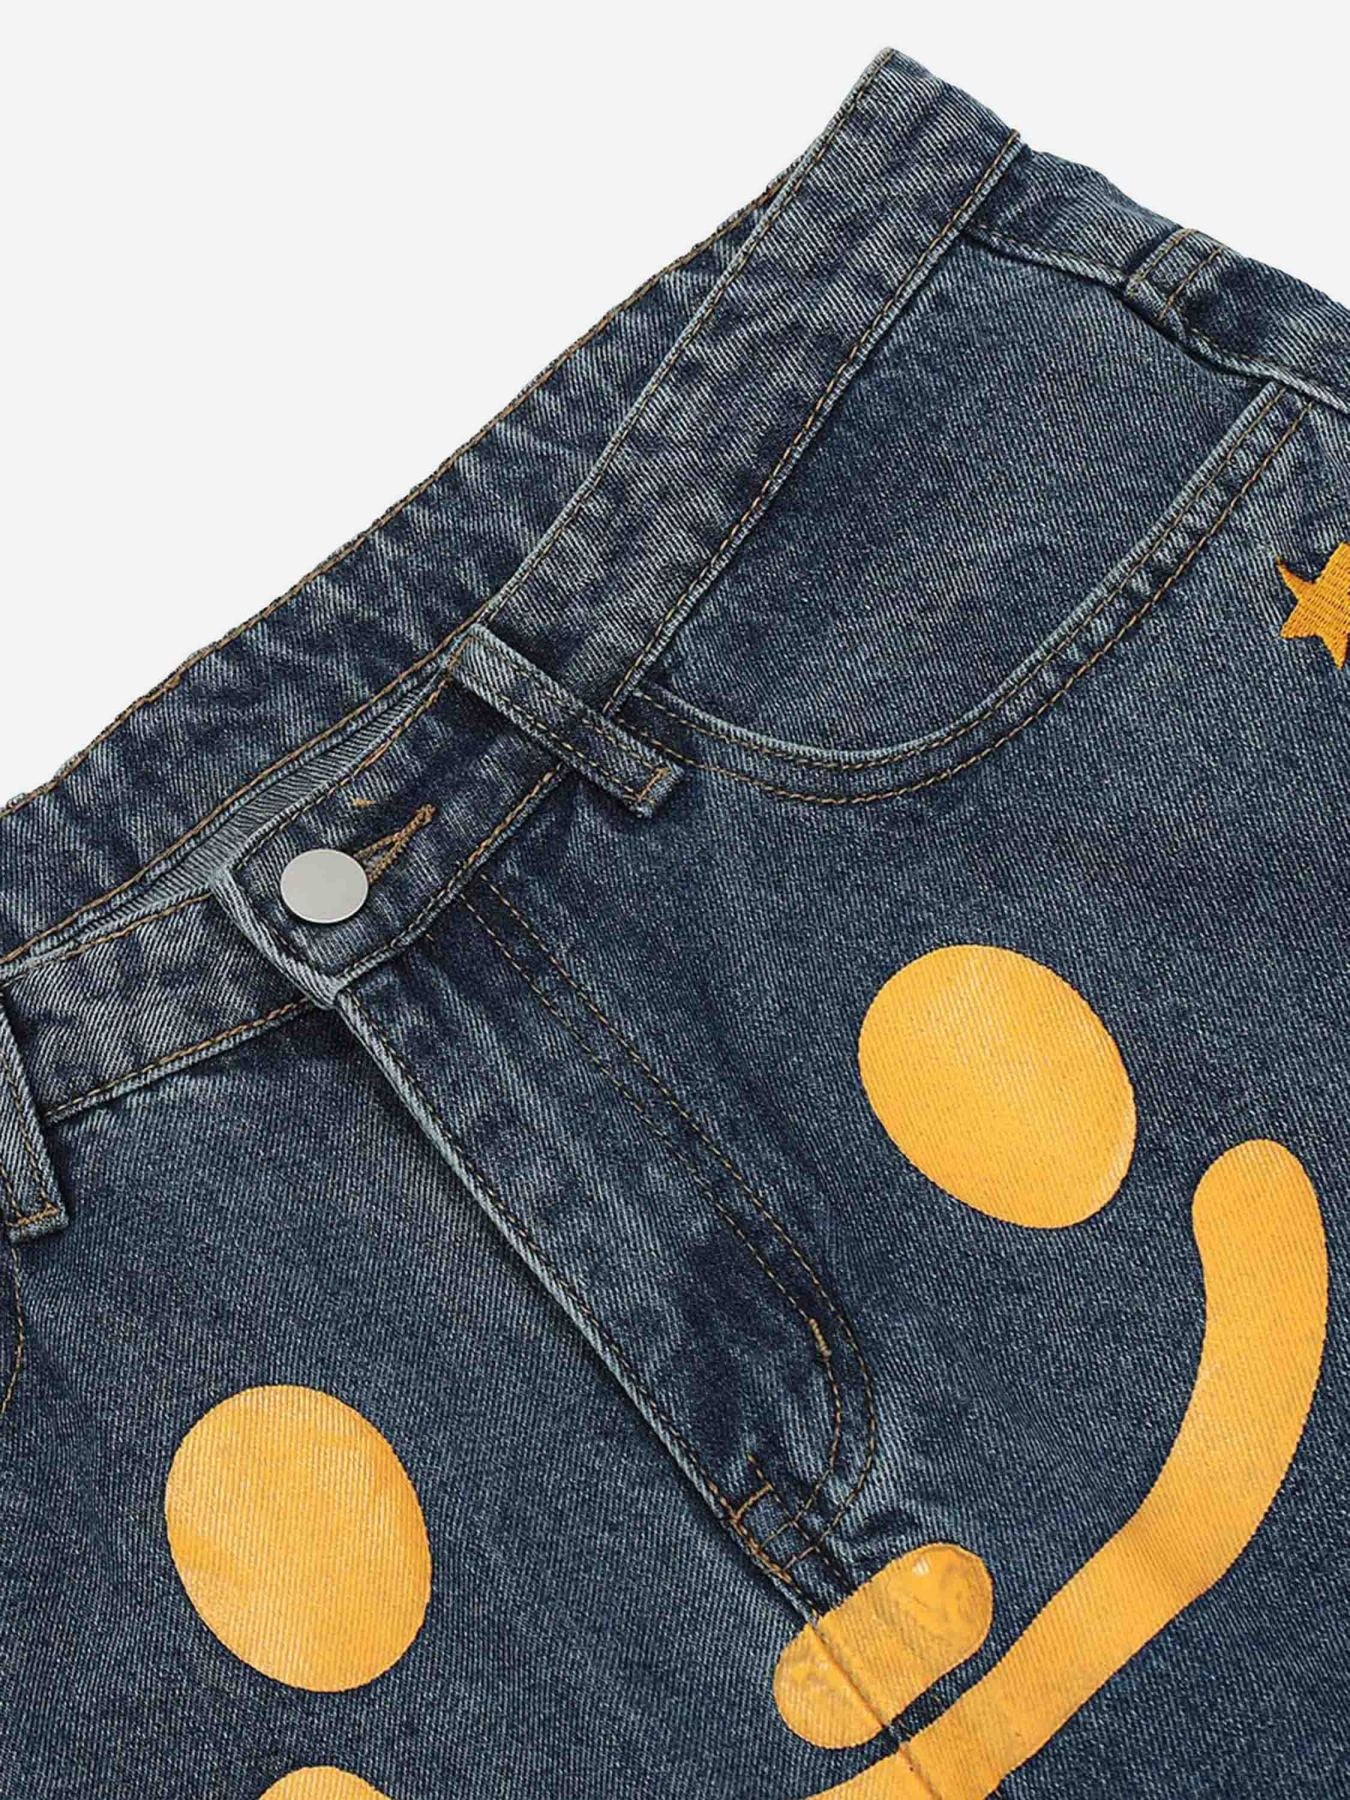 Thesupermade Personality Smiley Face Printed Jeans